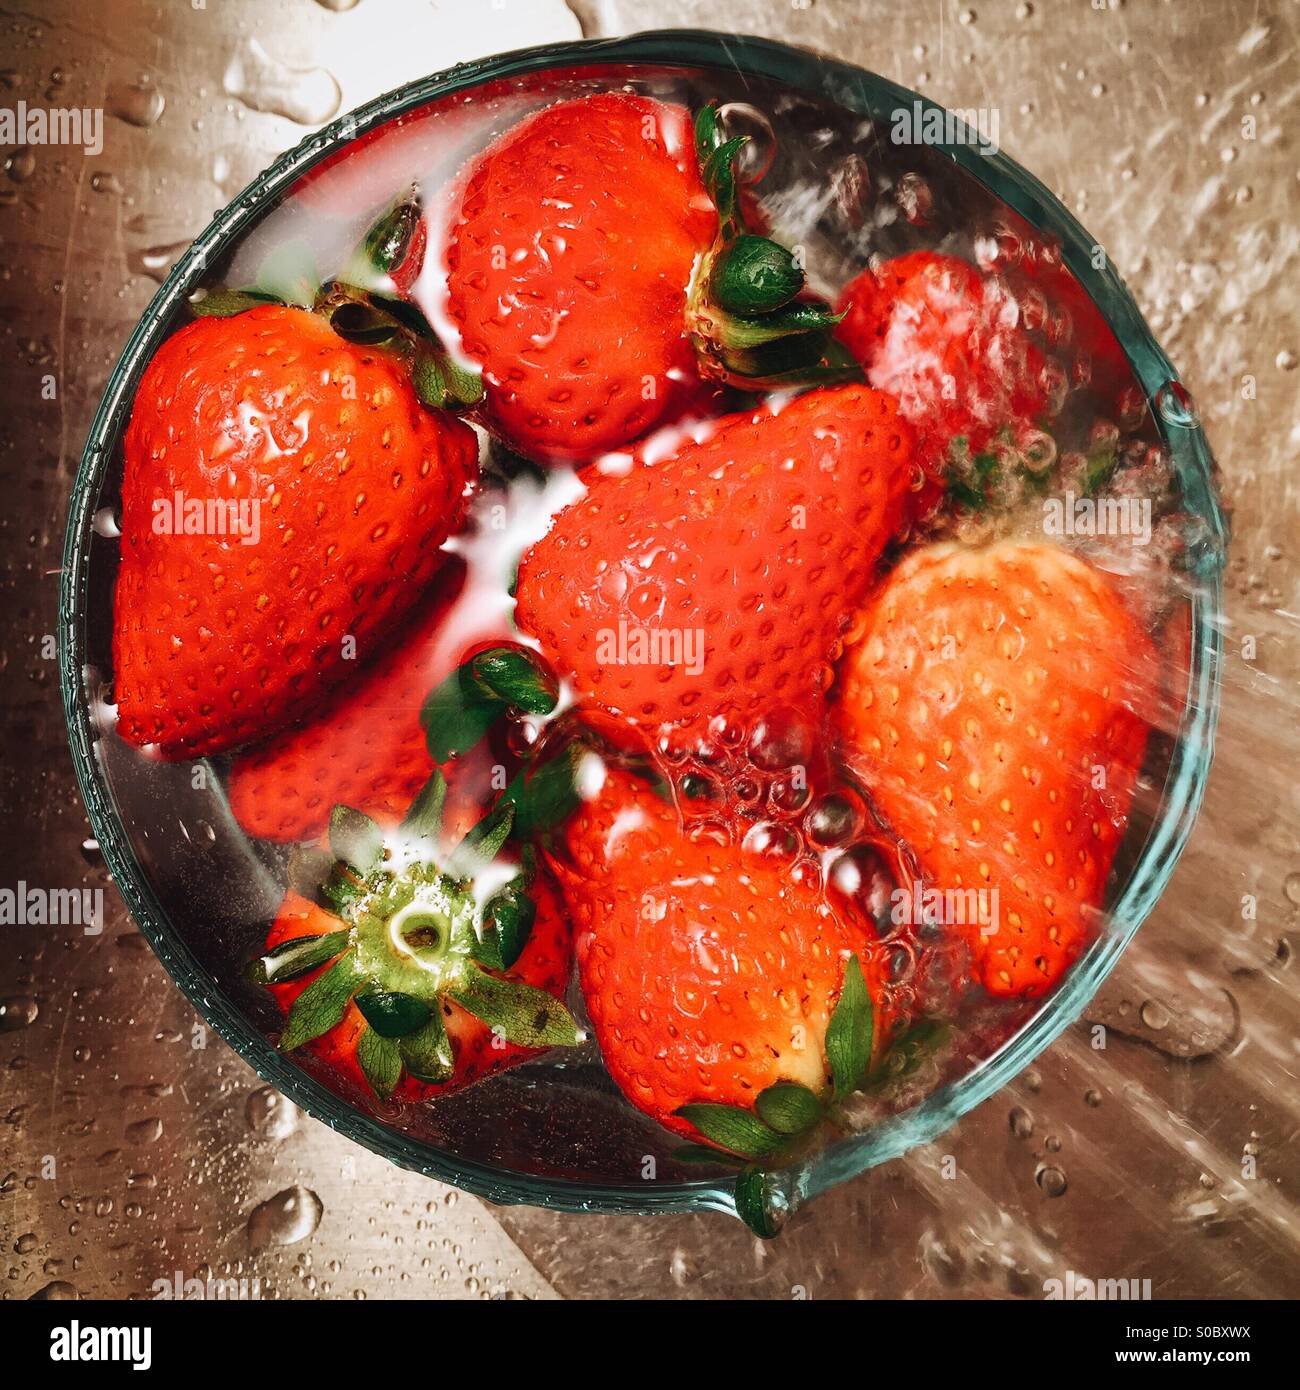 A small bowl of organic strawberries being washed in a stainless steel sink. Stock Photo